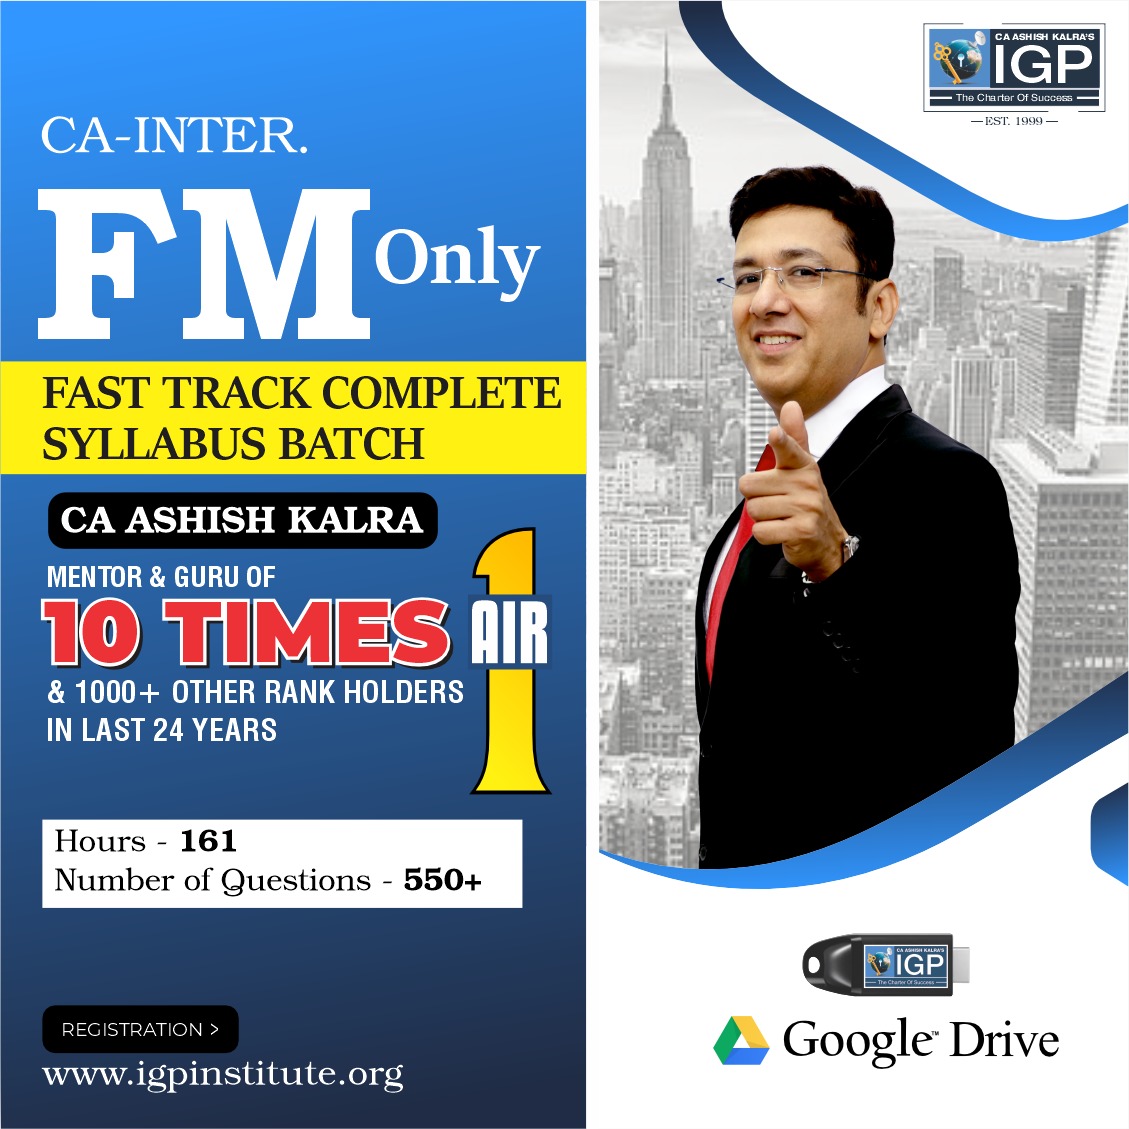 CA Inter FM Only Fast Track Complete Syllabus Batch-CA-INTER-Financial Management  (FM Only)- CA Ashish Kalra